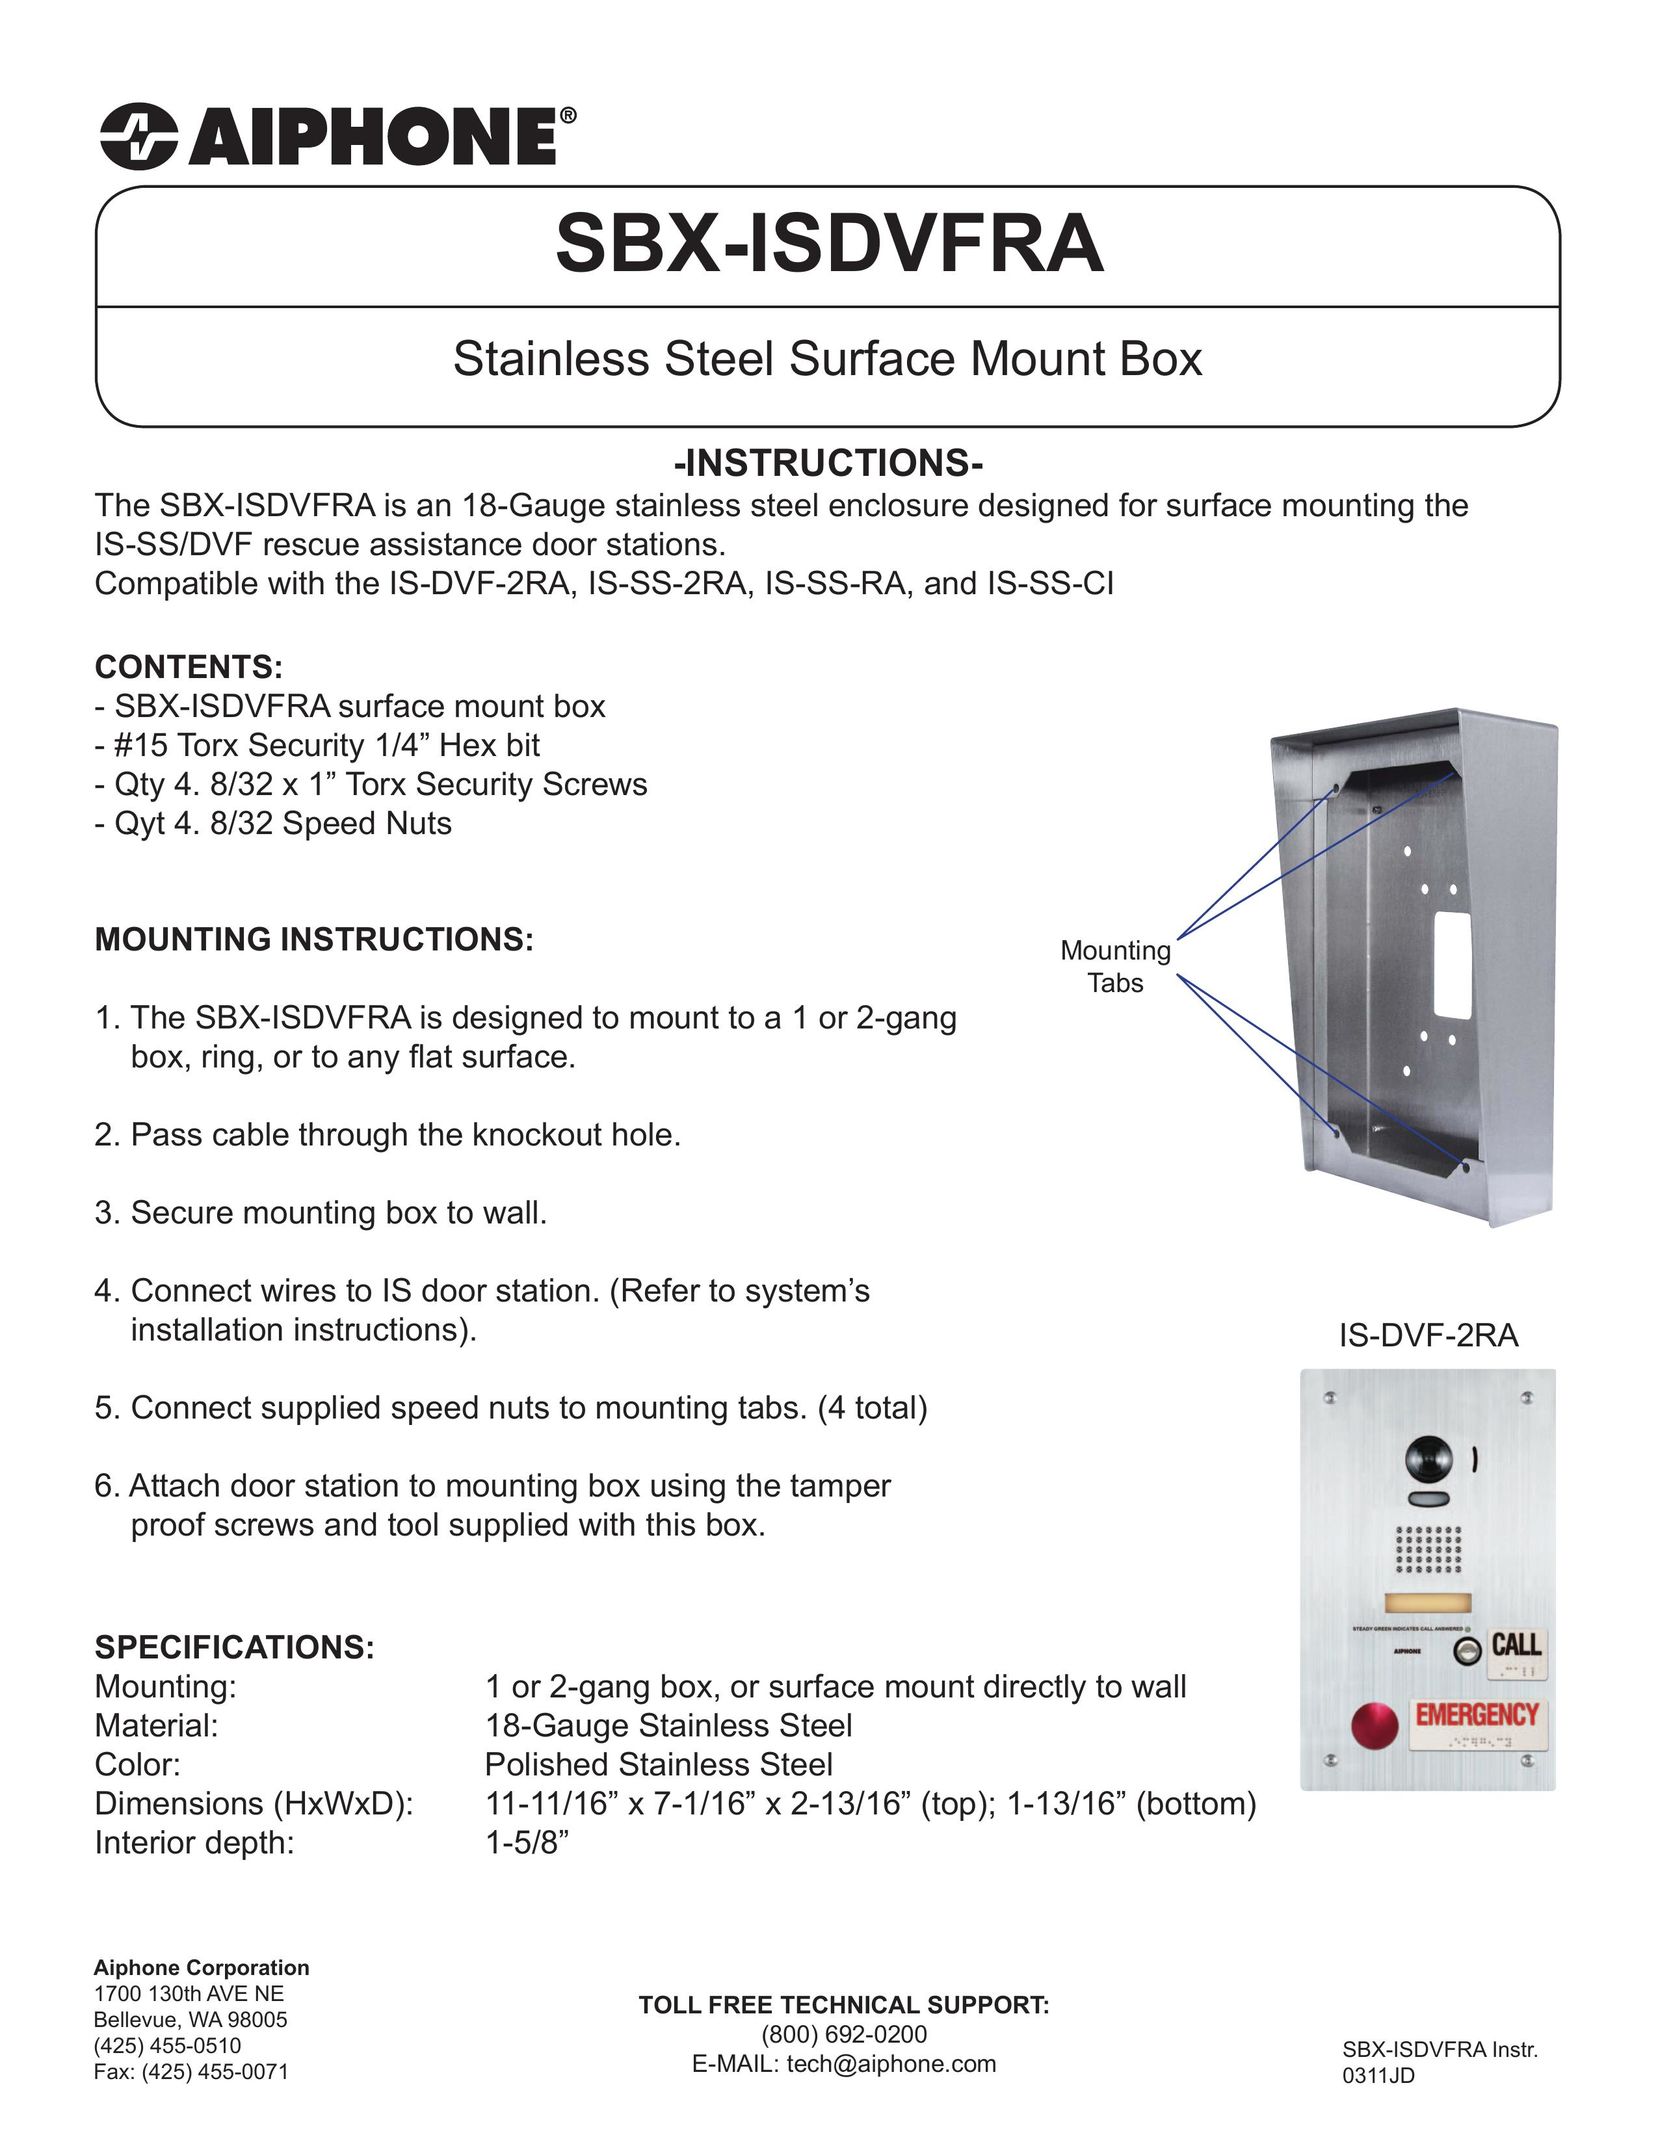 Aiphone SBX-ISDVFRA TV Mount User Manual